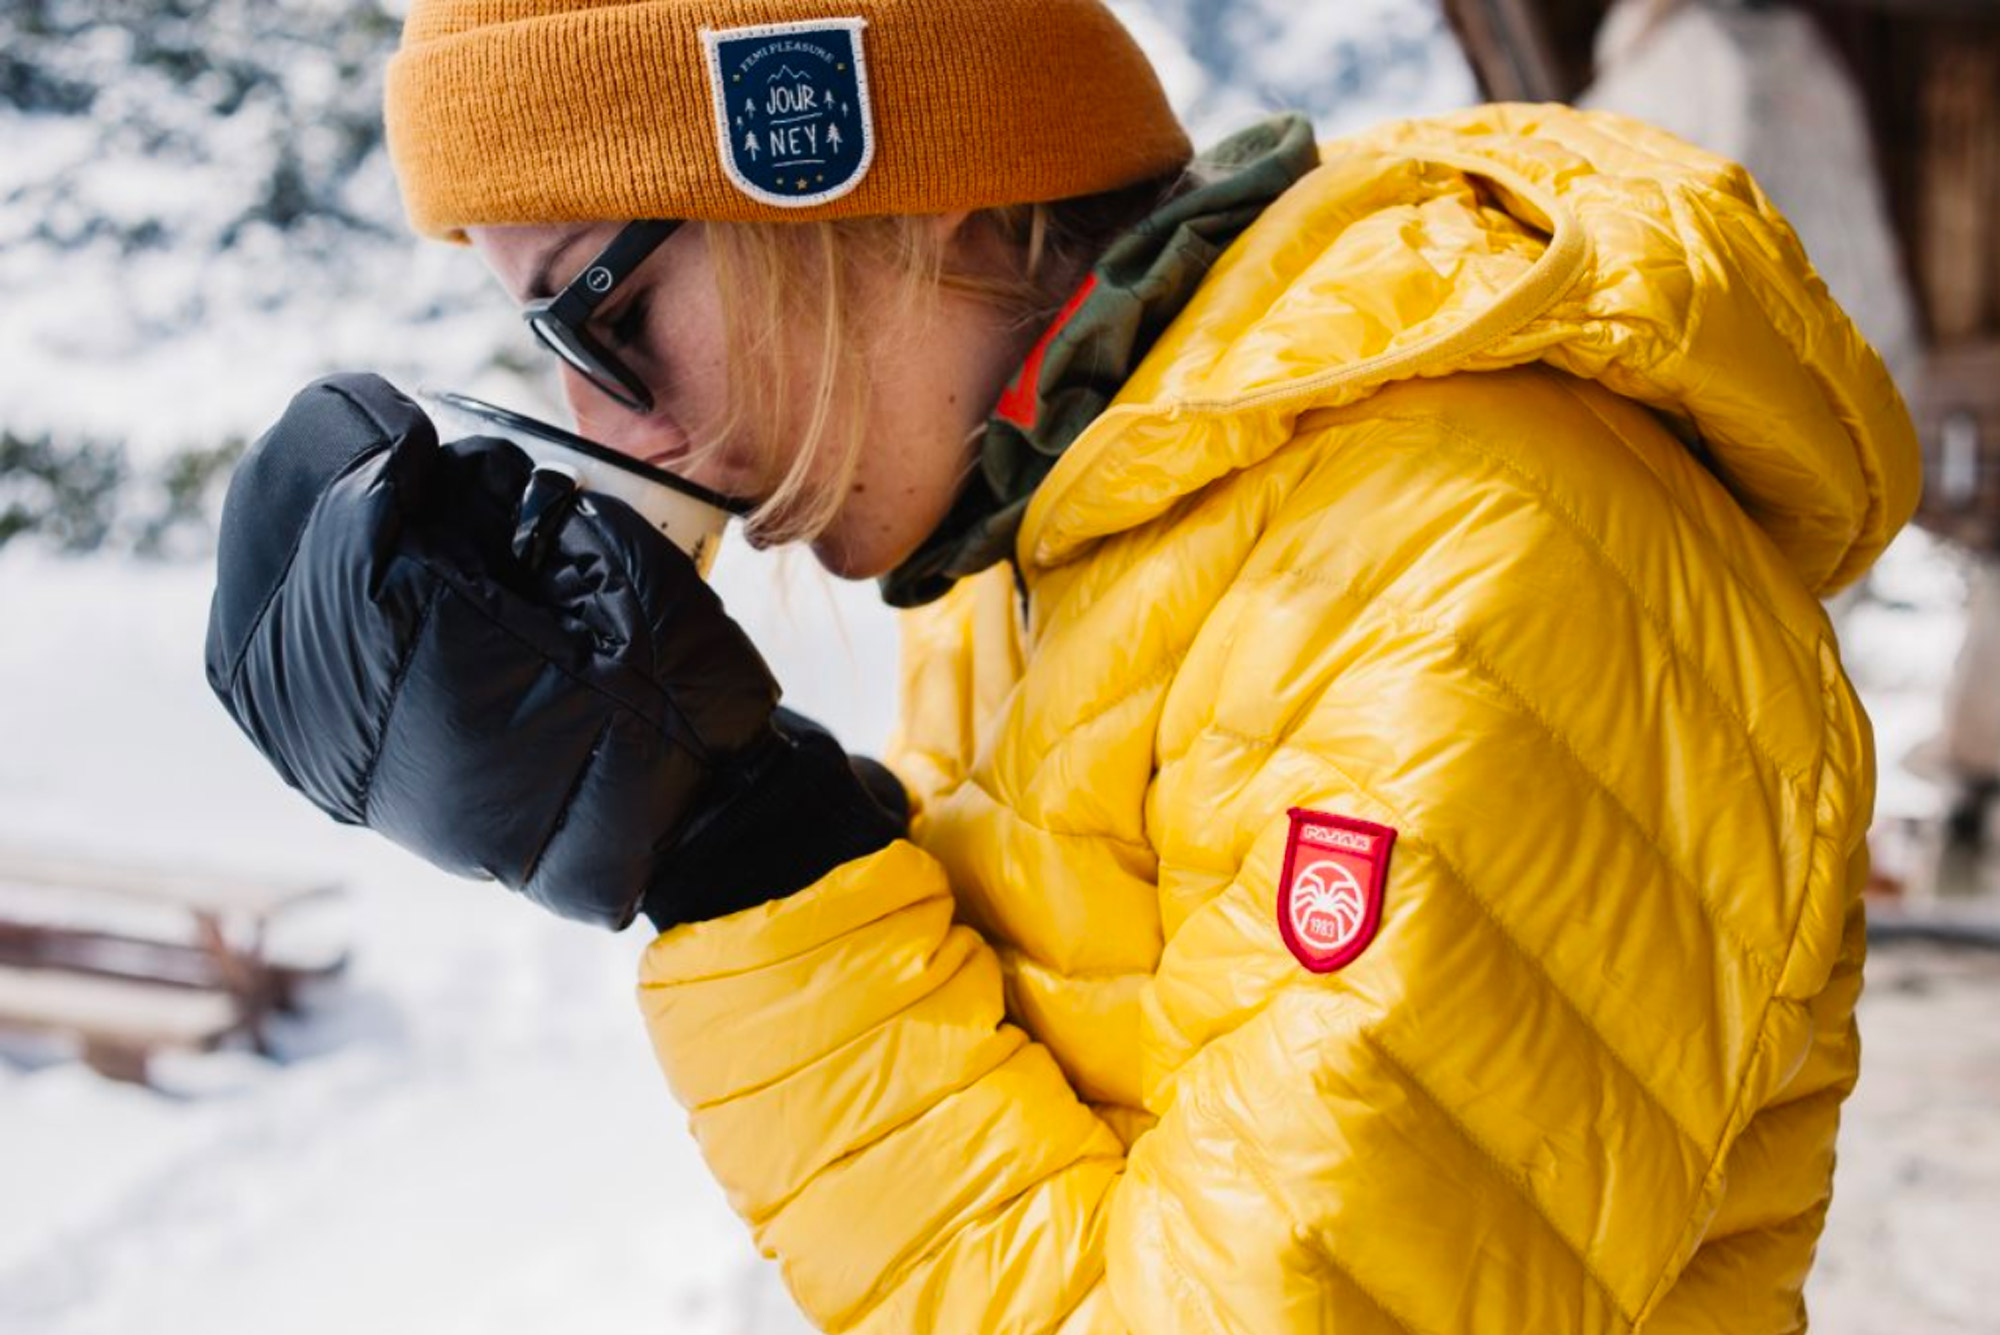 HOW TO WASH A DOWN JACKET AND NOT DESTROY IT? STEP BY STEP INSTRUCTIONS